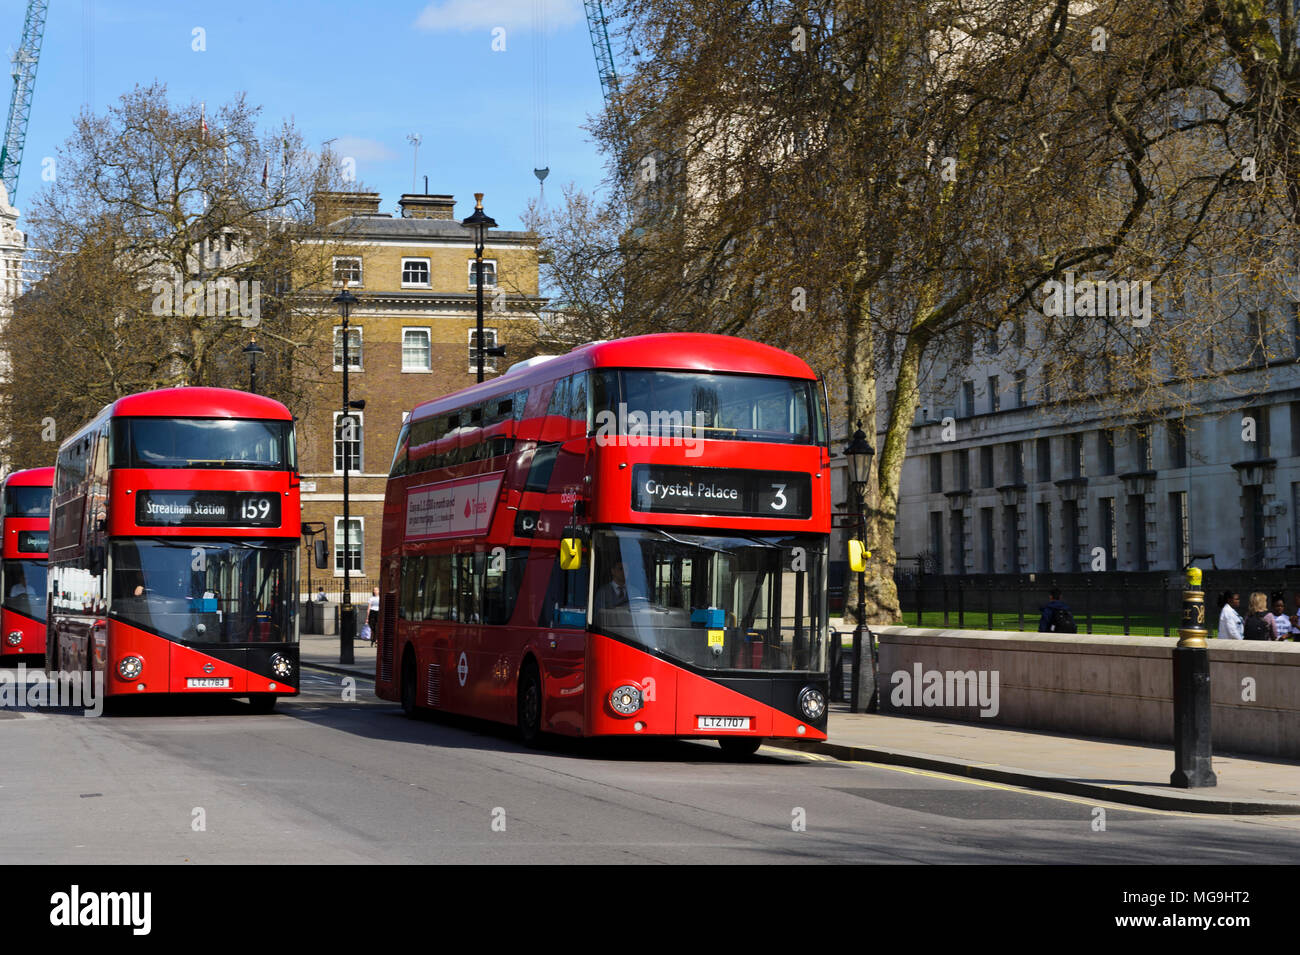 A British red double decker bus, London, England, United Kingdom Stock Photo